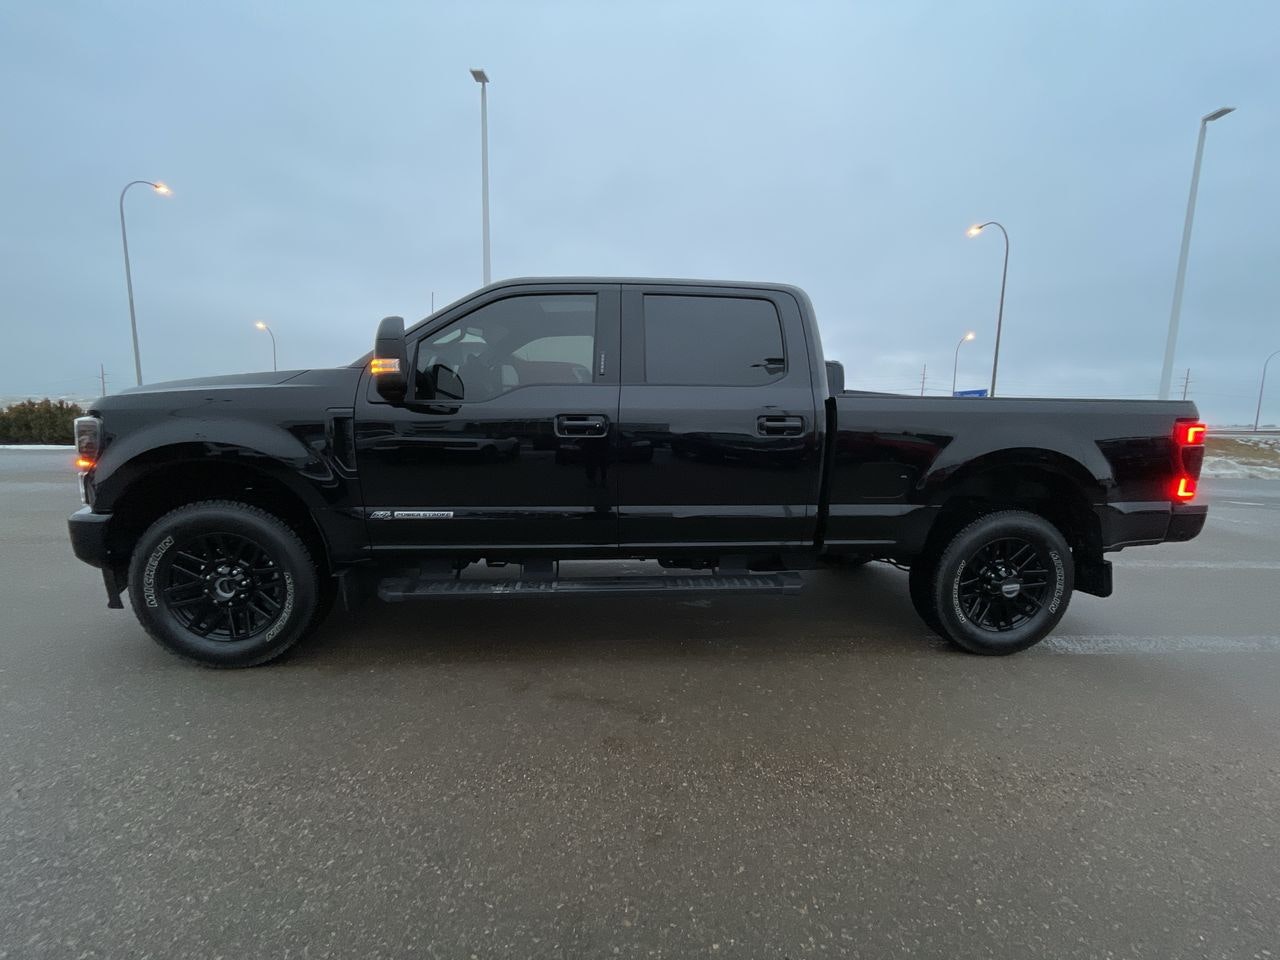 2022 Ford SUPER DUTY F-350 Lariat BLACK APPERANCE PACKAGE FX4 MOON ROOF LEATHER (TS22109A) Main Image